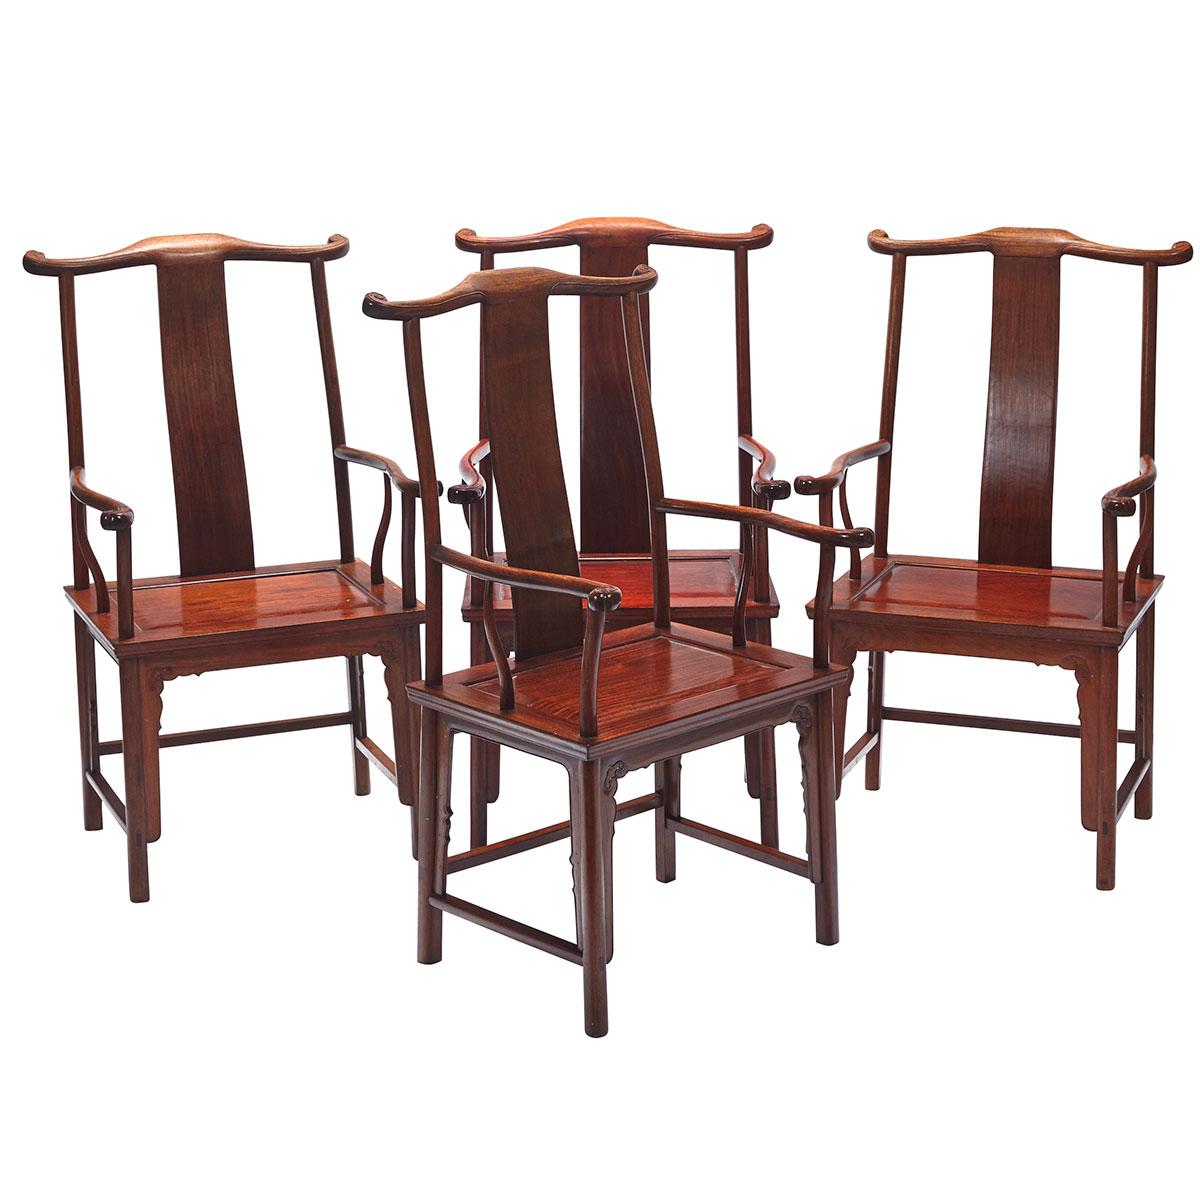 Set of Four Rosewood Armchairs, Mid-20th Century